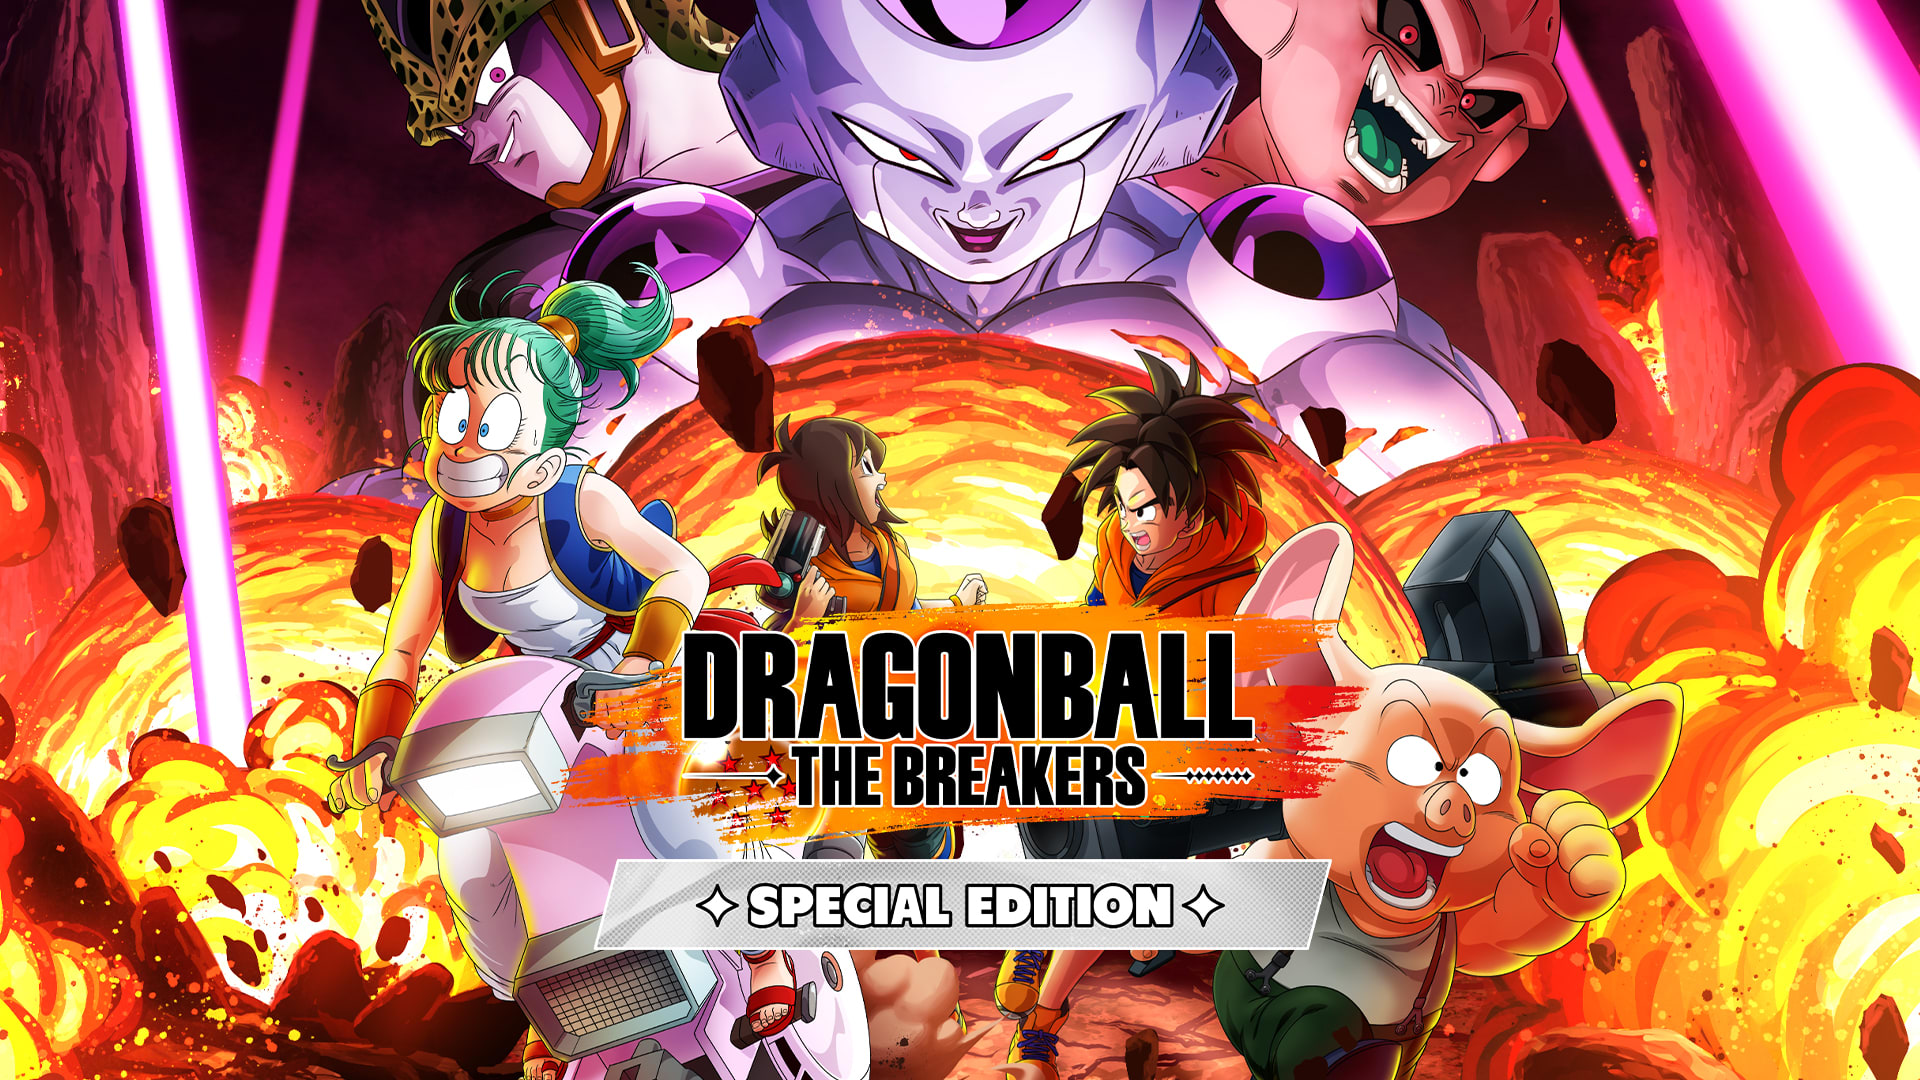 DRAGON BALL: THE BREAKERS - Special Edition